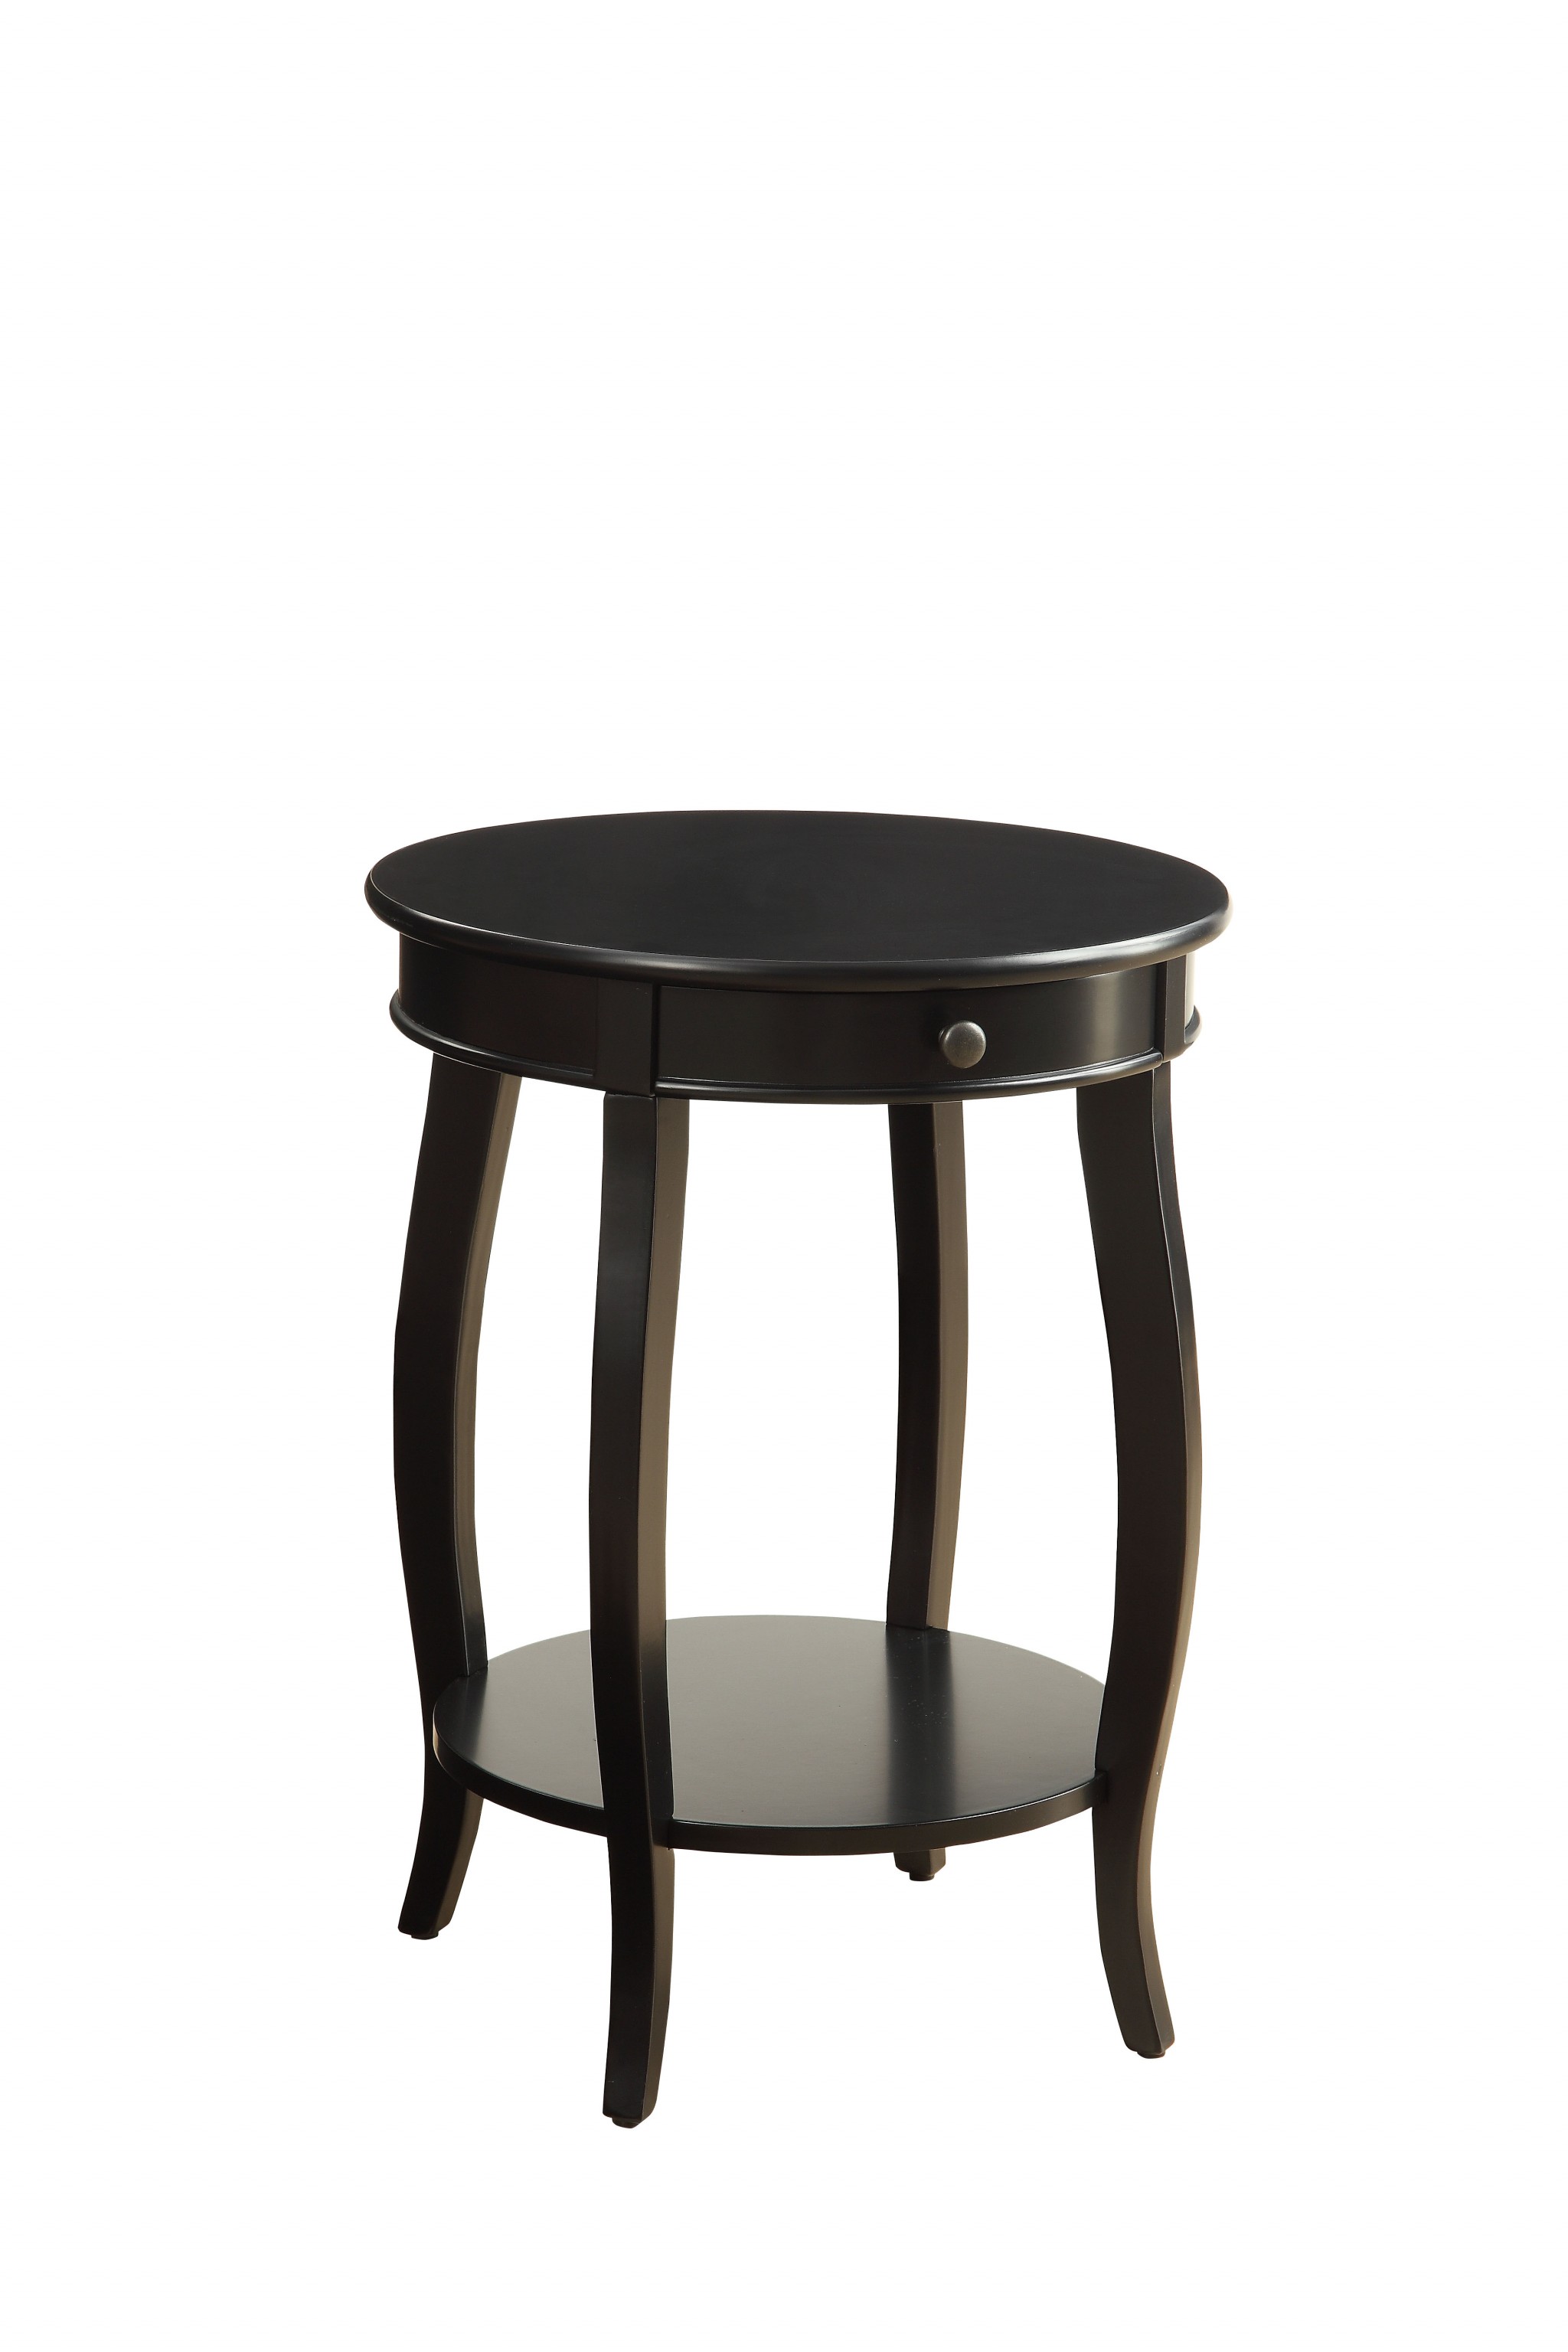 Round Black Wood End Table with Storage and Shelf